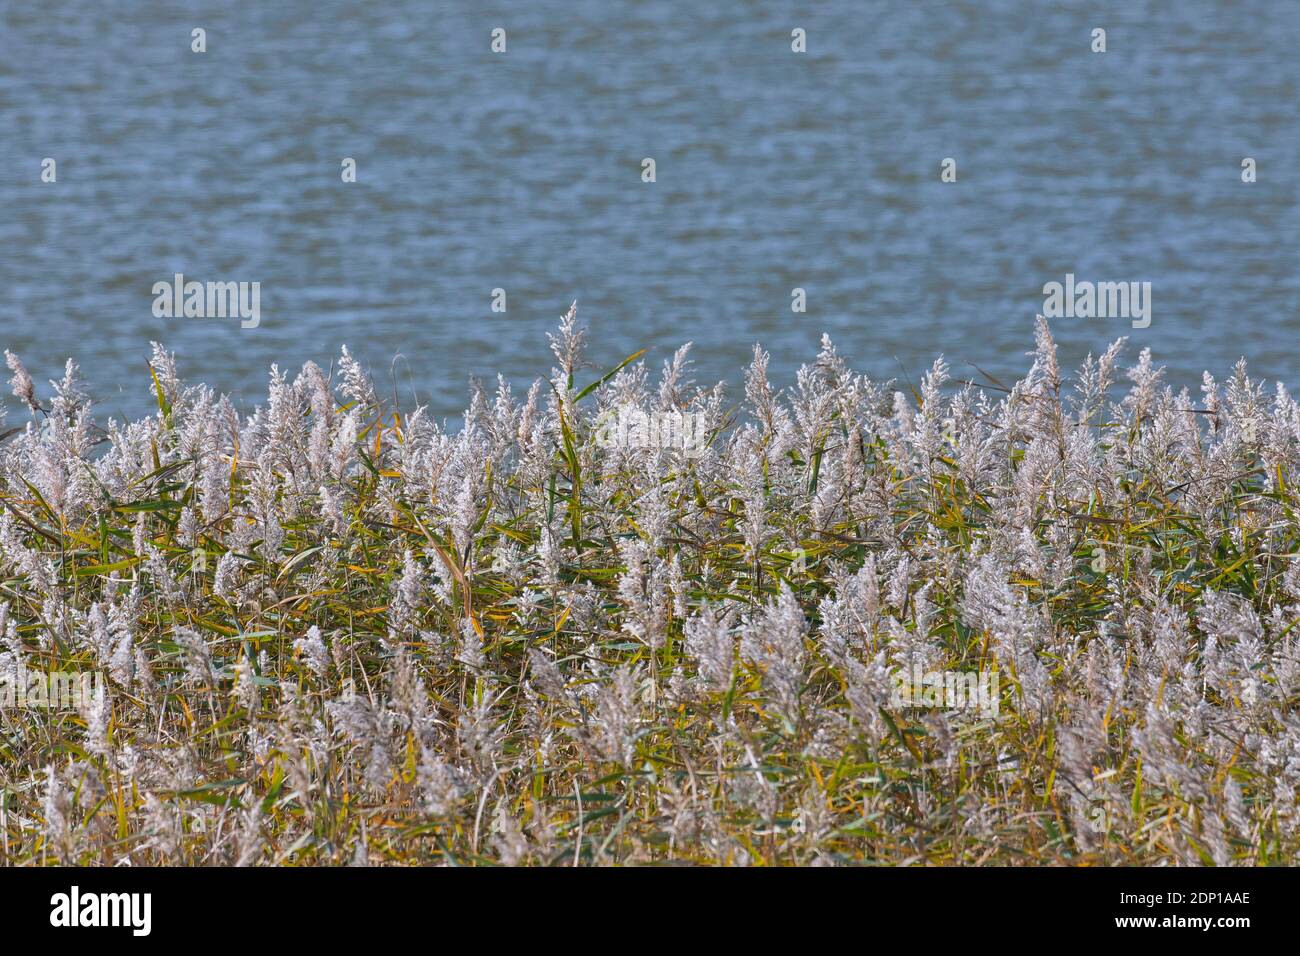 Panicles of common reed (Phragmites australis / Phragmites communis) in reedbed / reed bed at lake's water's edge in autumn Stock Photo